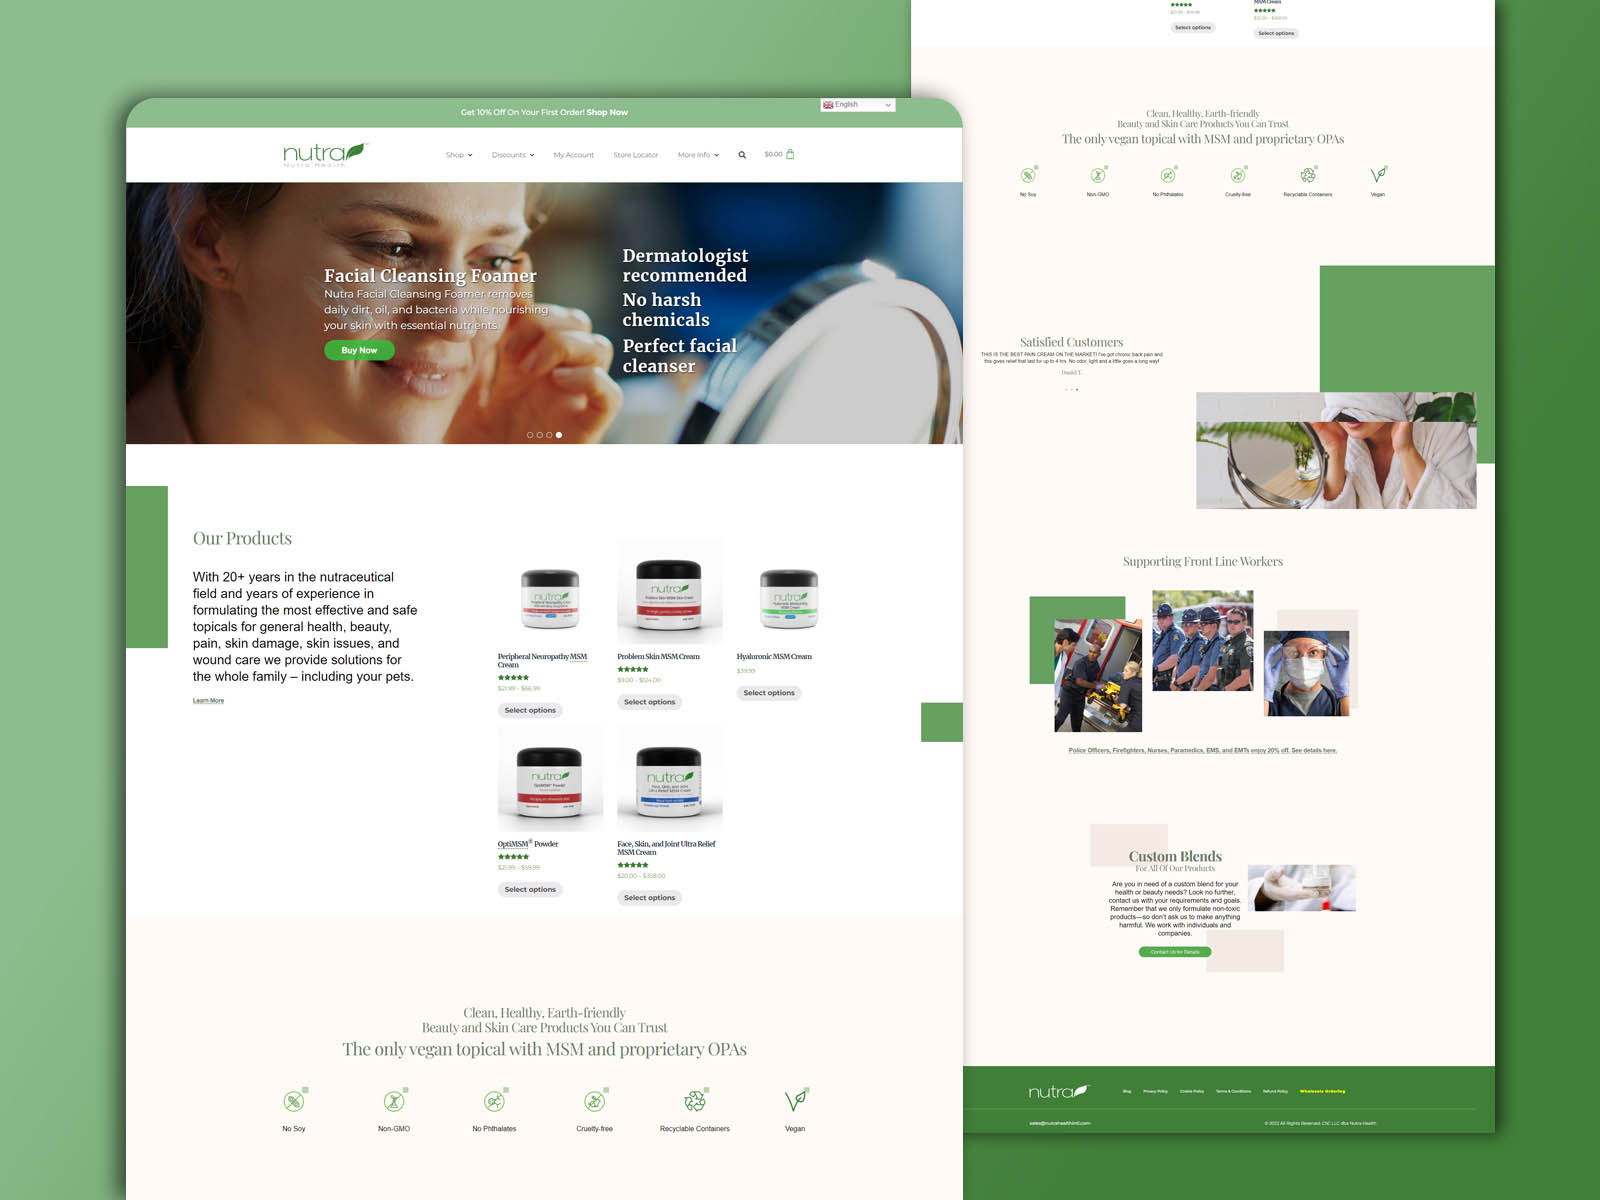 Beauty Product e-Commerce Website Design For Nutra Health